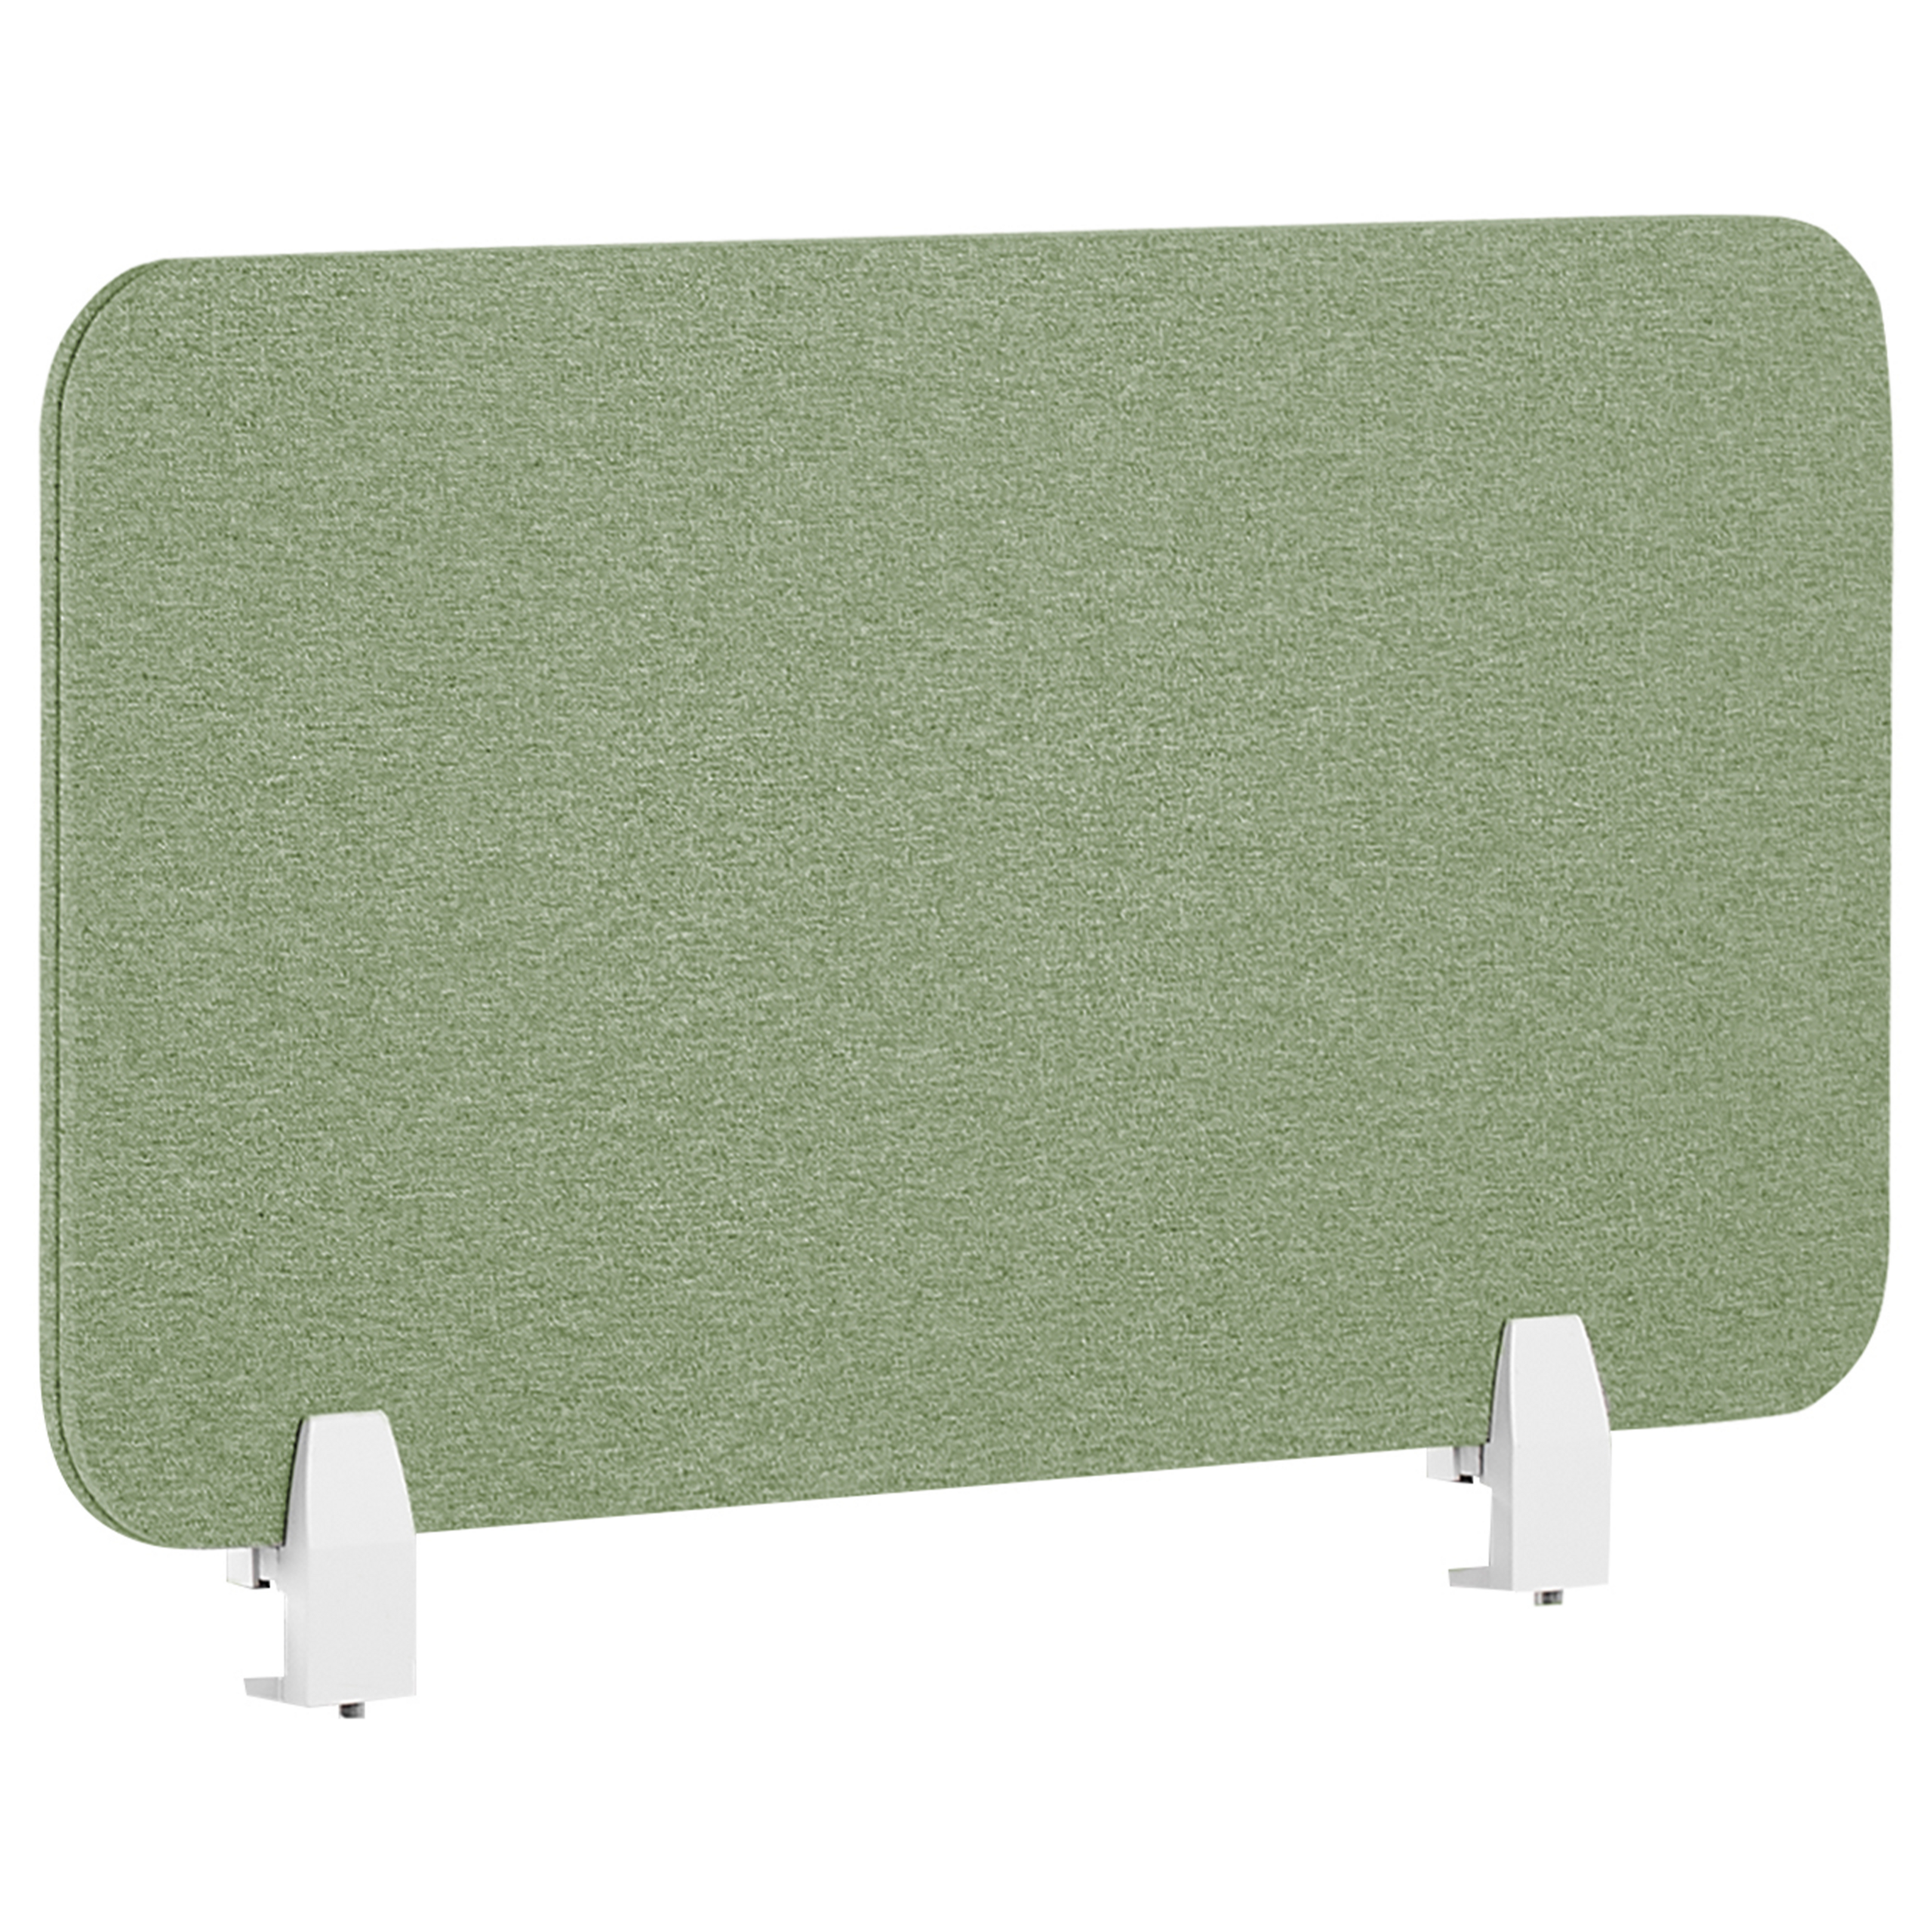 Beliani Desk Screen Green PET Board Fabric Cover 72 x 40 cm Acoustic Screen Modular Mounting Clamps Home Office Material:Polyester Size:2x40x72